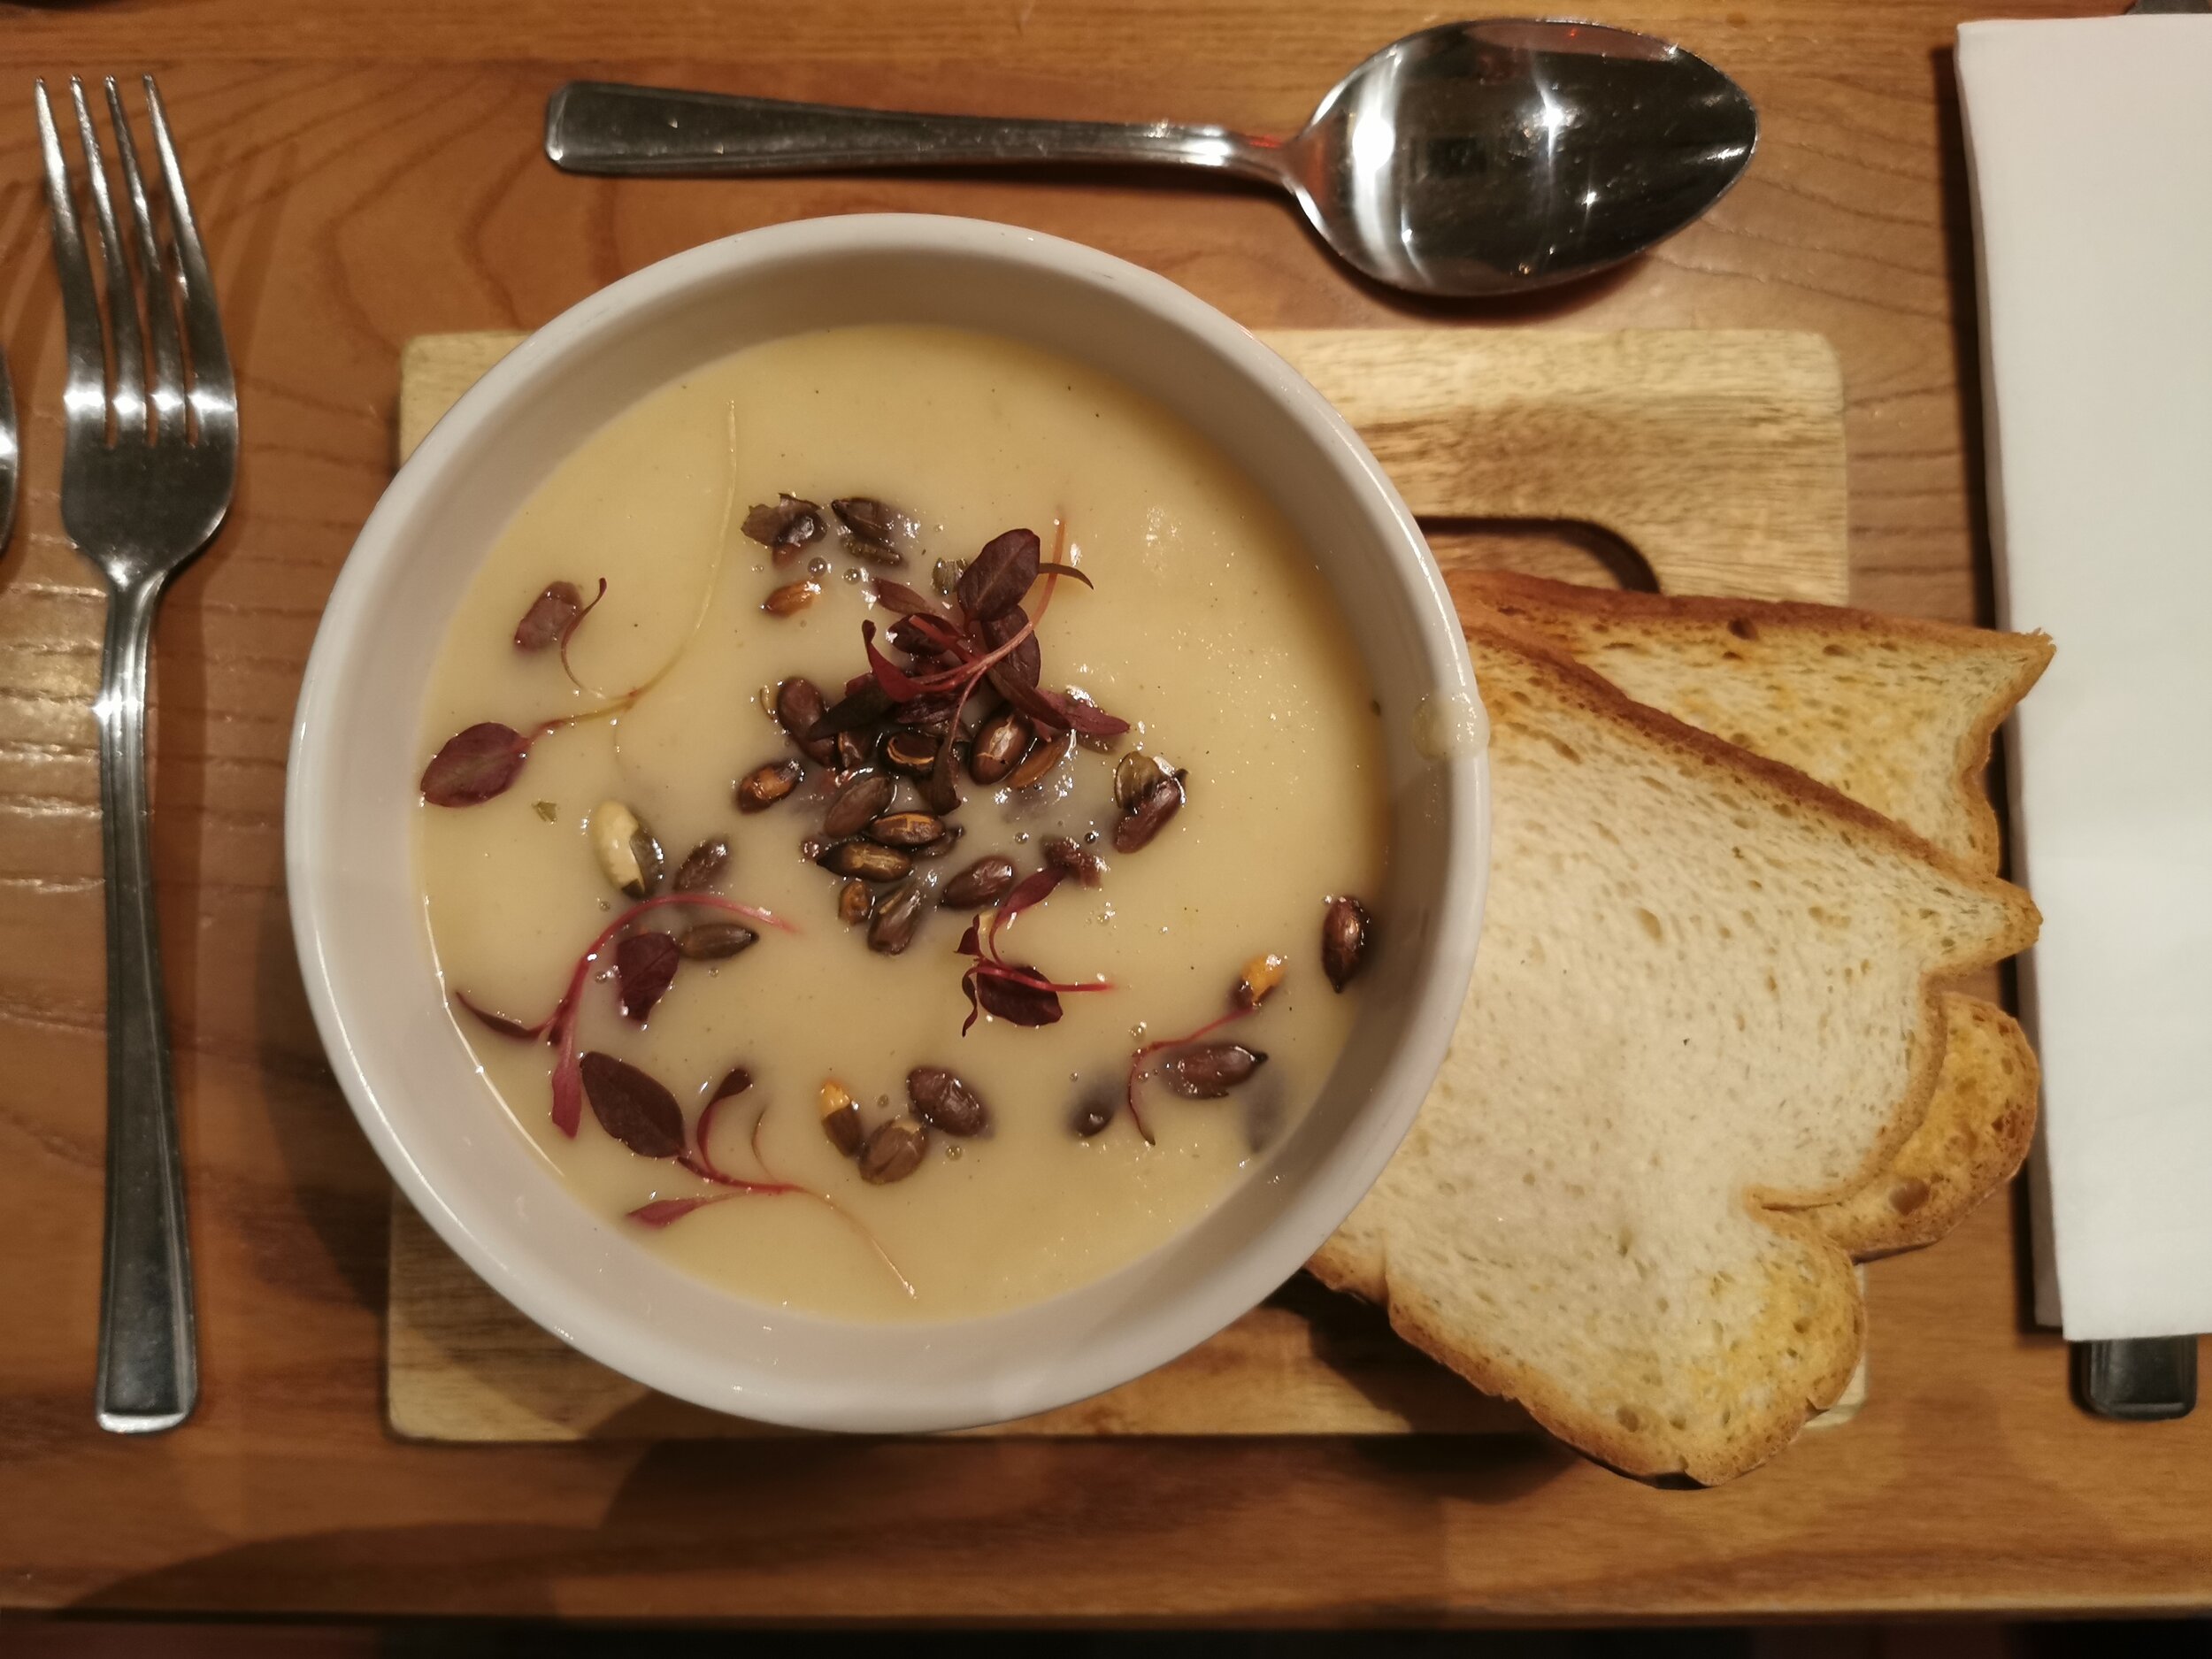 Festive Seasonal Soup: roast parsnip soup with chestnuts and a drizzle of truffle oil, served with rye &amp; caraway bread